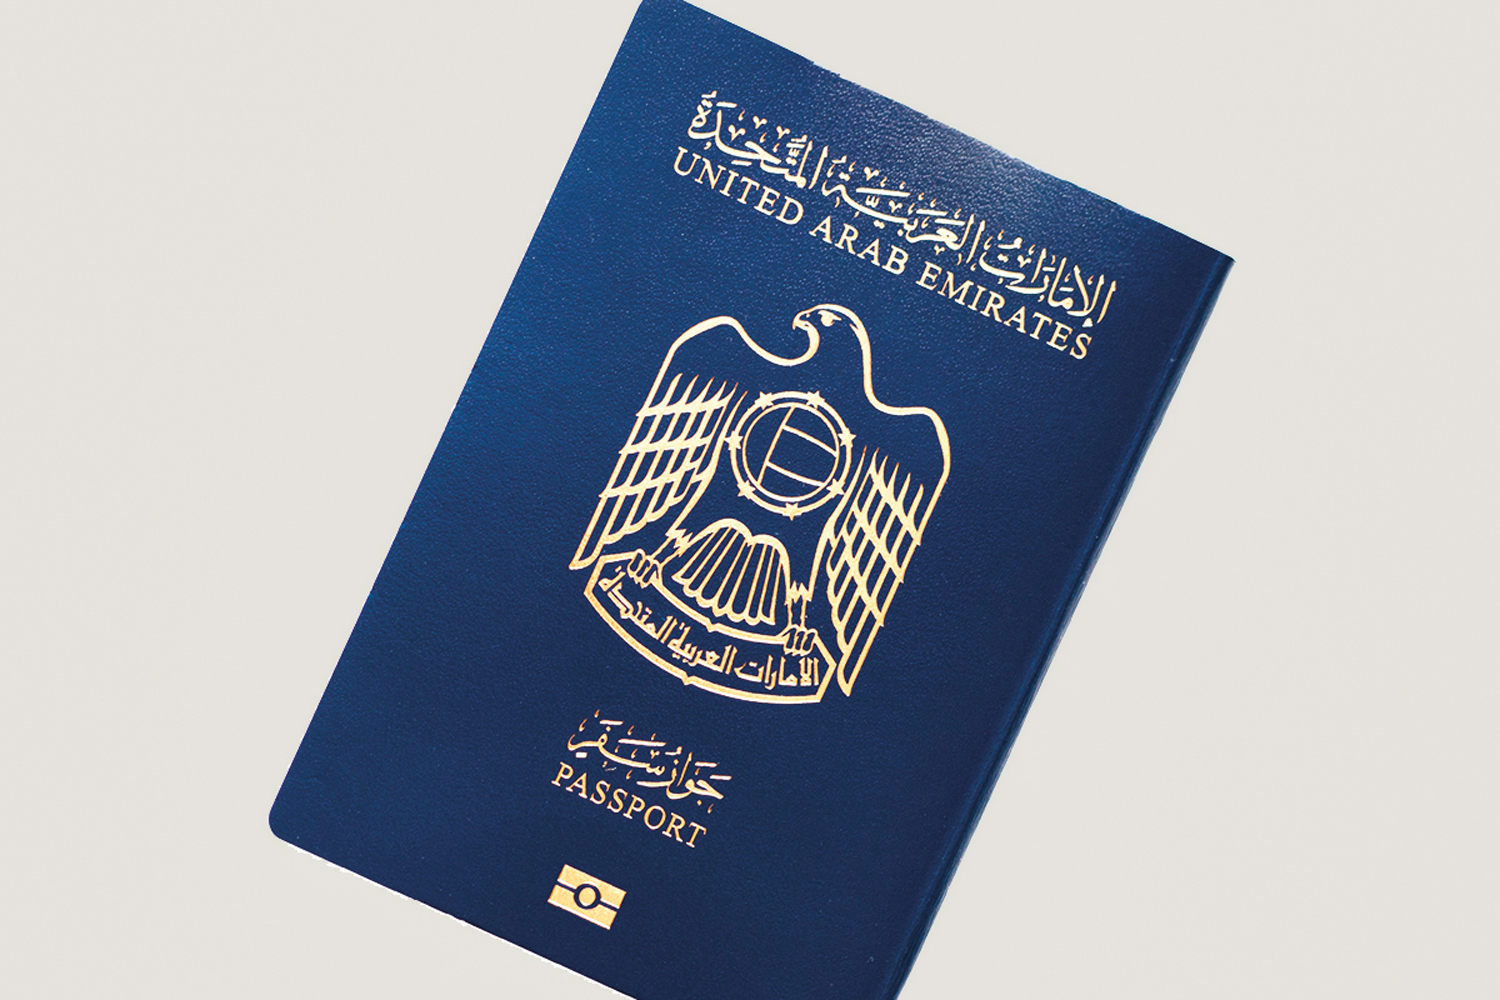 Vietnam Temporary Resident Card For United Arab Emirates 2023 – Procedures To Apply Vietnam TRC For UAE Experts, Investors, Workers, Managers, and Businessmen